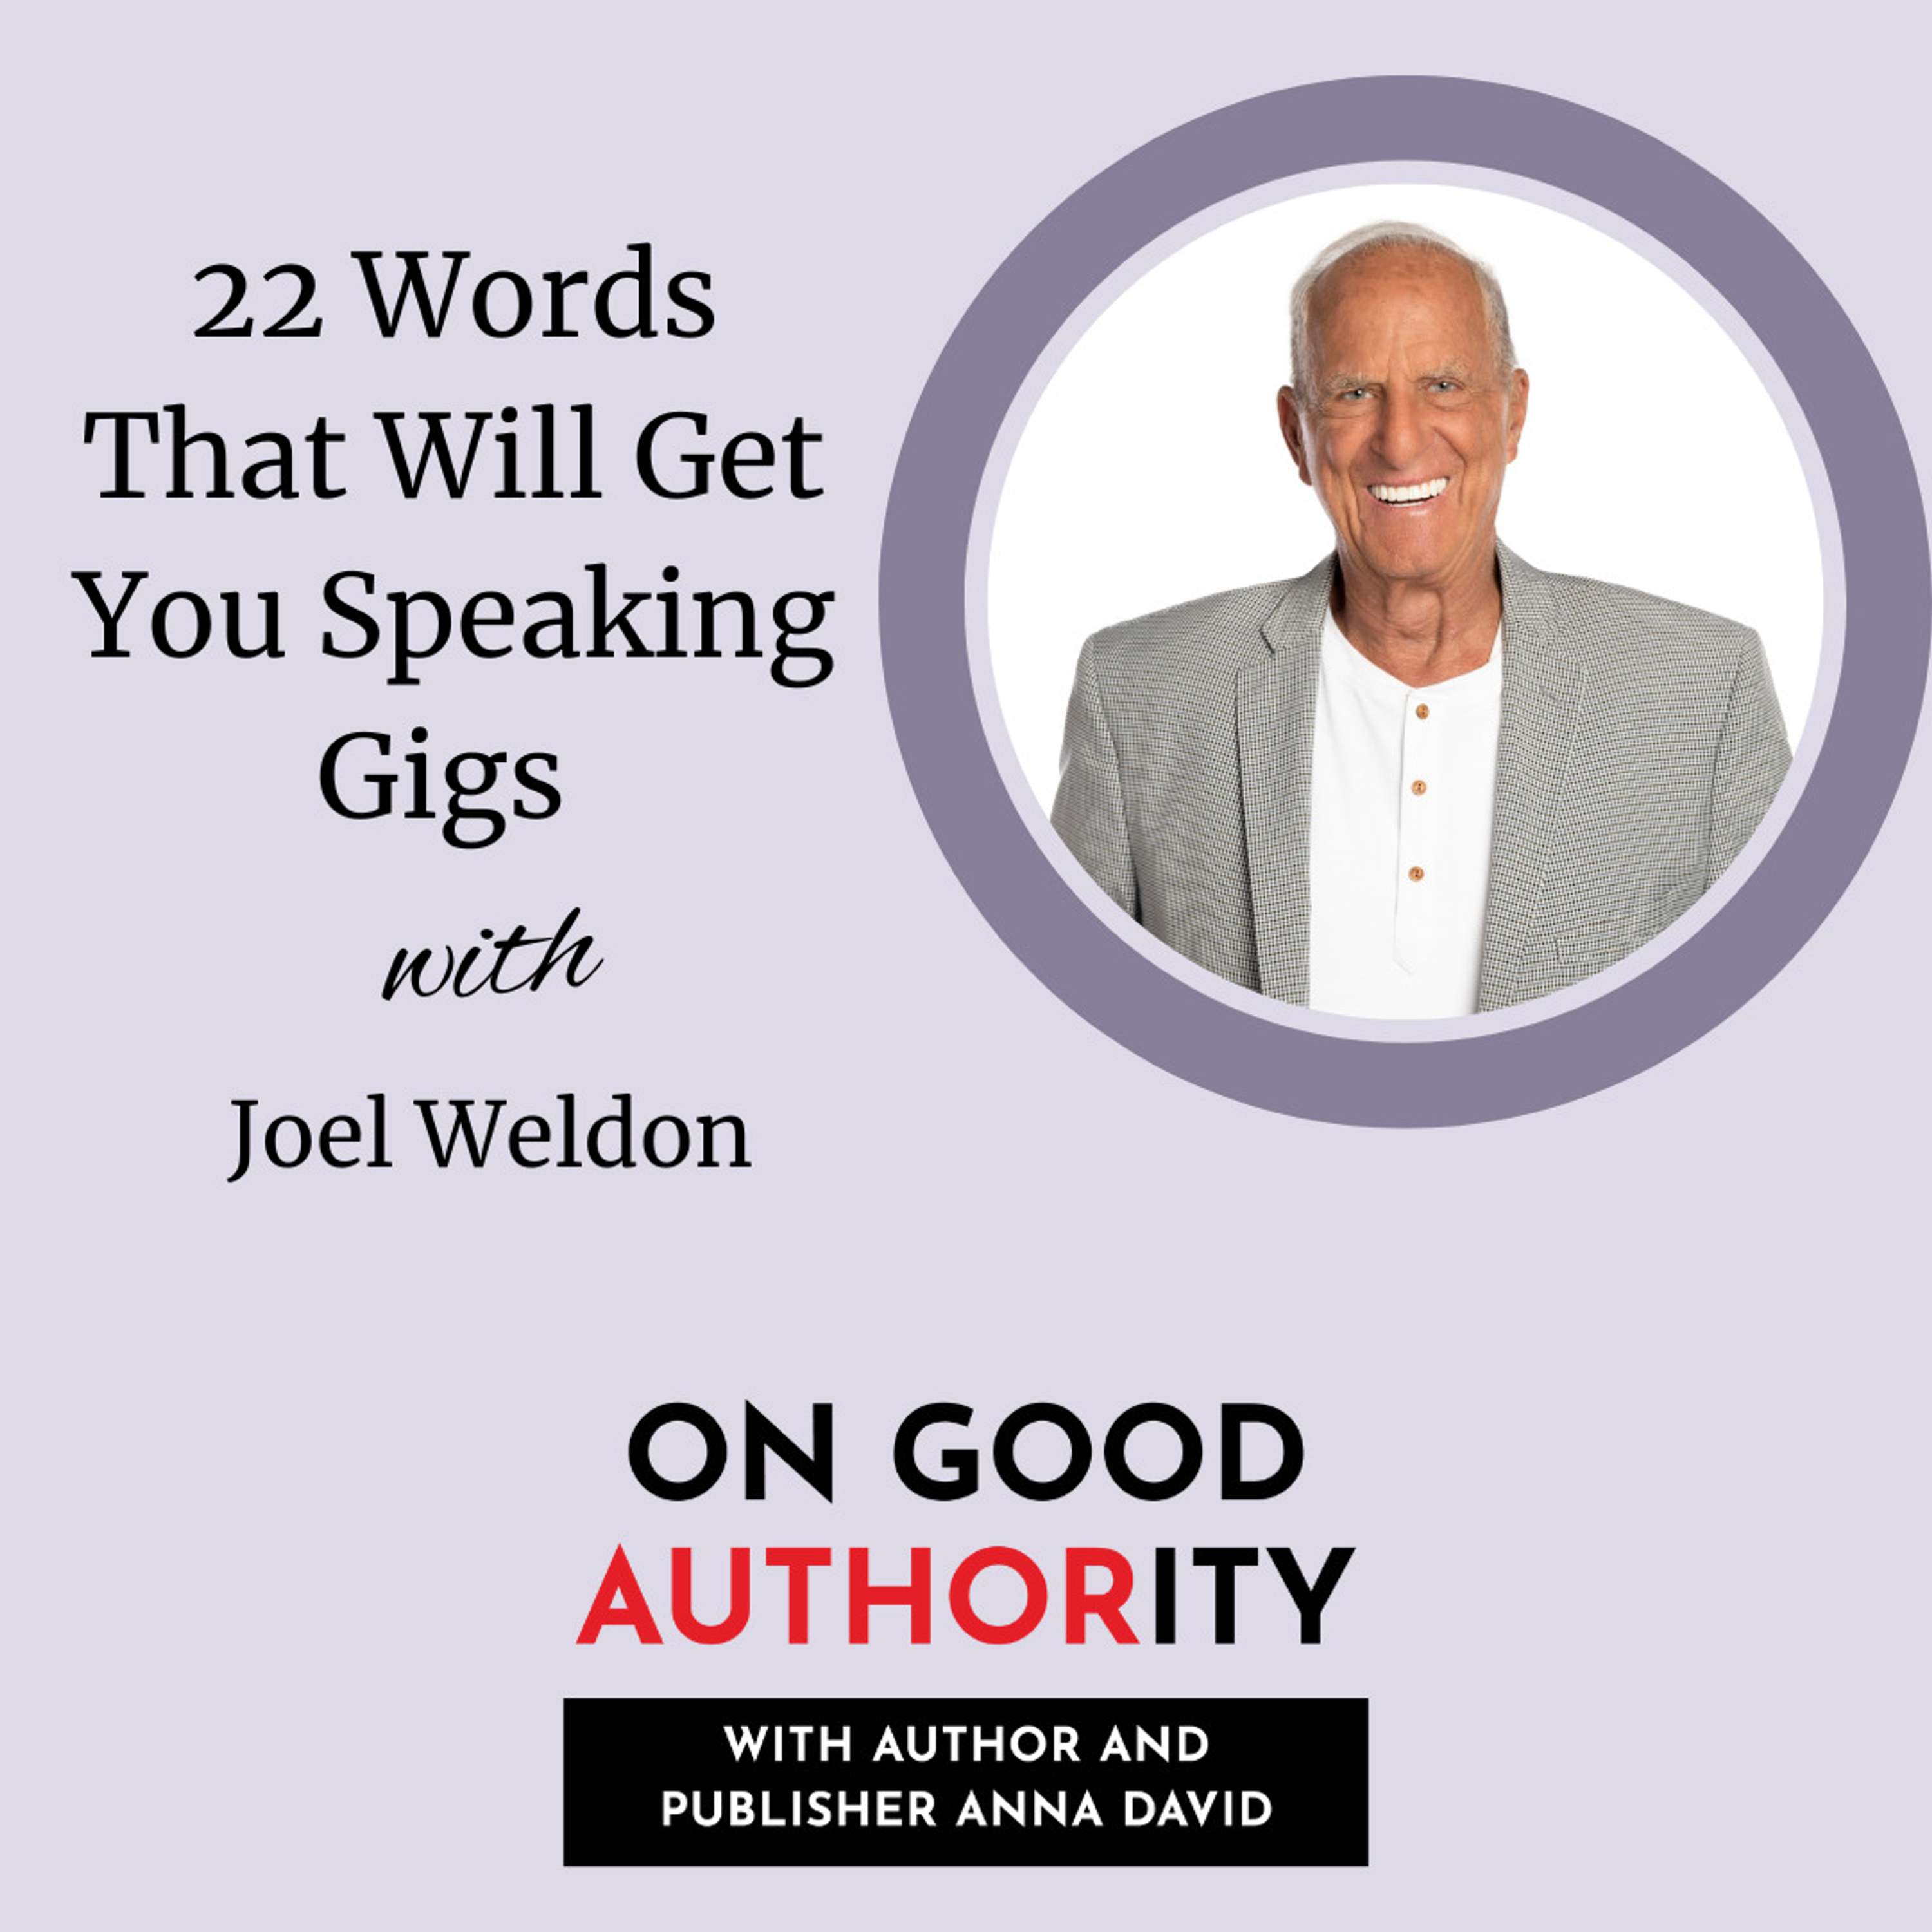 22 Words That Will Get You Speaking Gigs (with Joel Weldon)